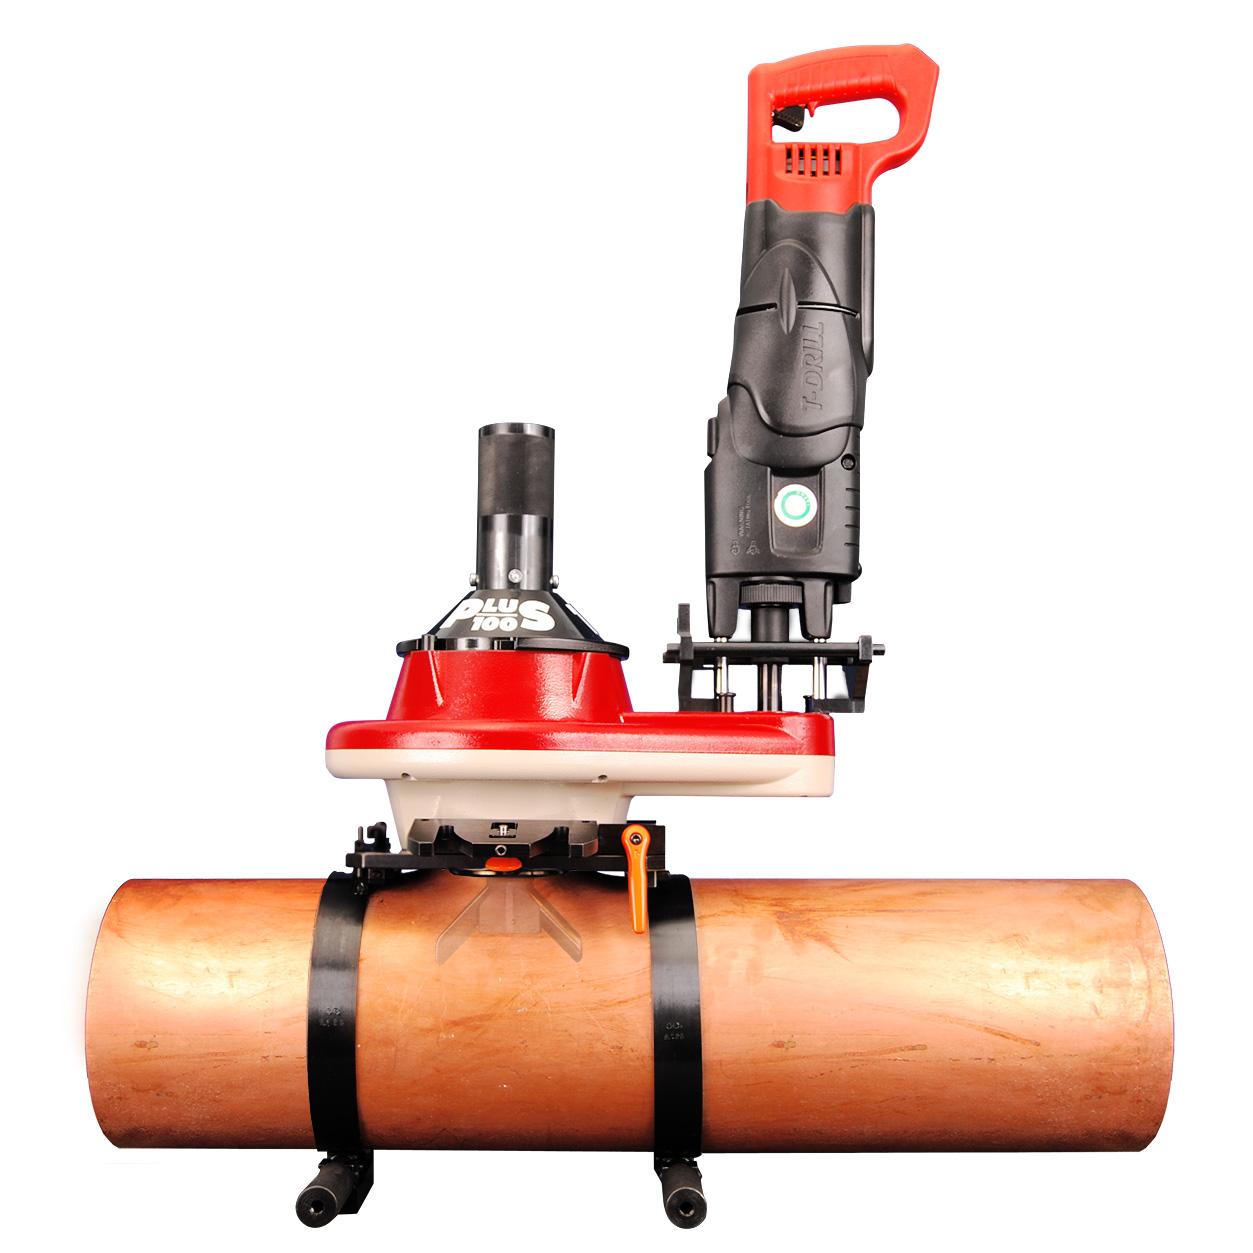 T-DRILL Portable Collaring System for Copper tubes